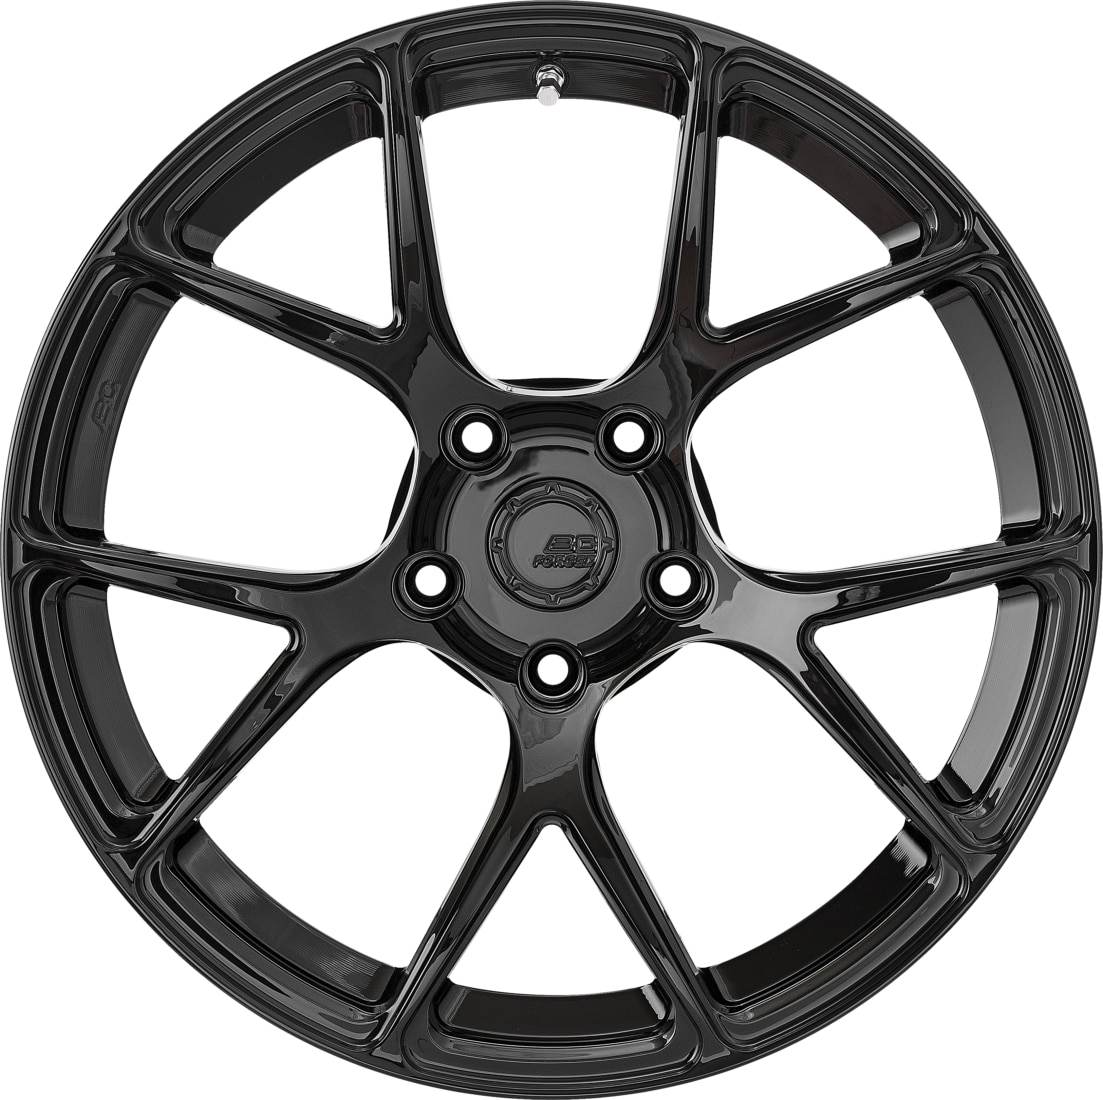 2020-23 BC Forged RZ05 Wheels for C8 Corvette, Set of 4